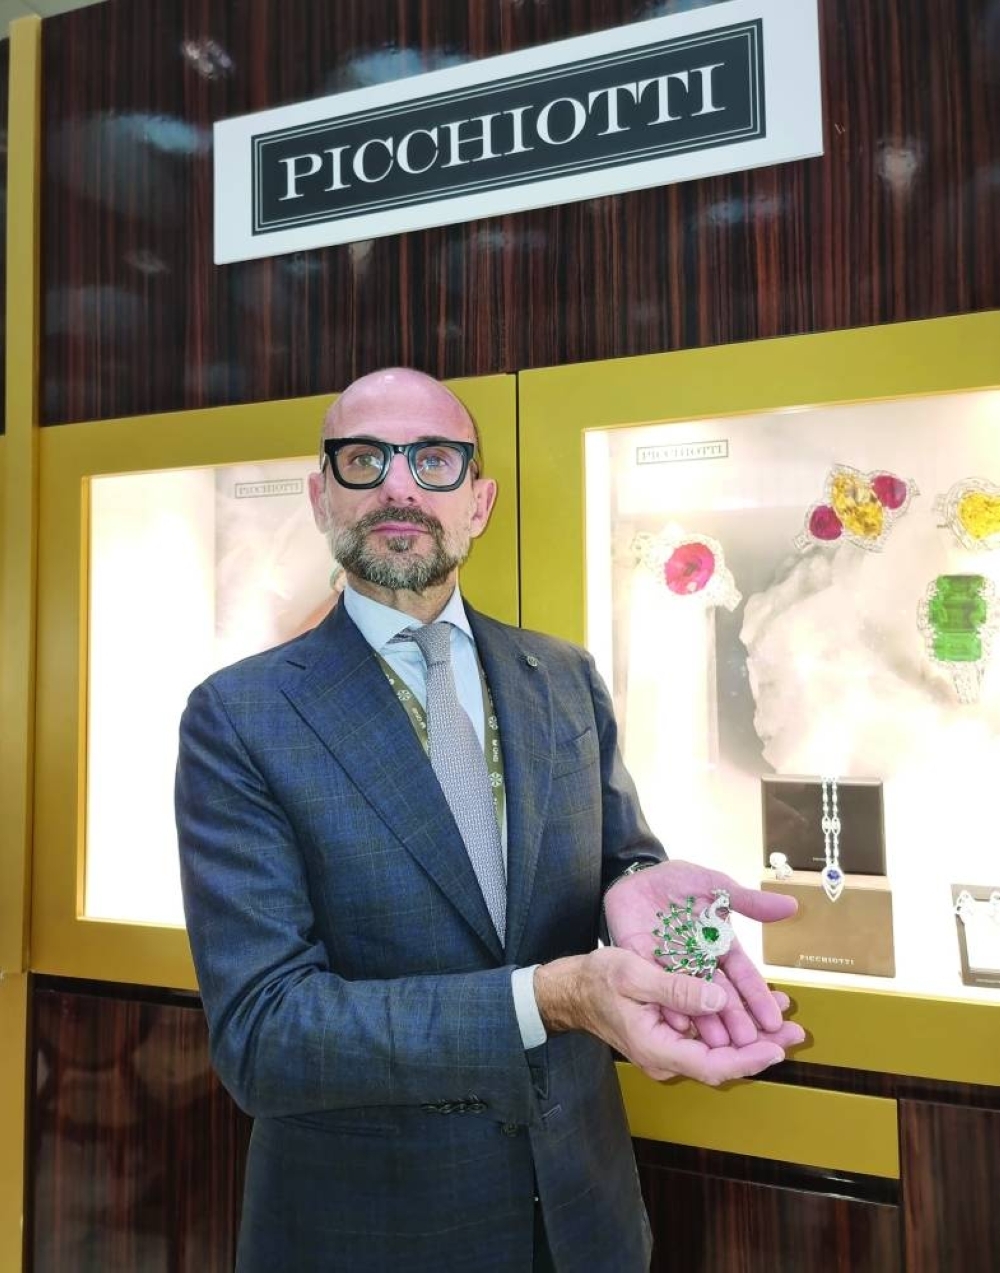 Filippo Picchiotti showcases his latest collections at DJWE, which has been attracting a large number of visitors. PICTURE: Joey Aguilar